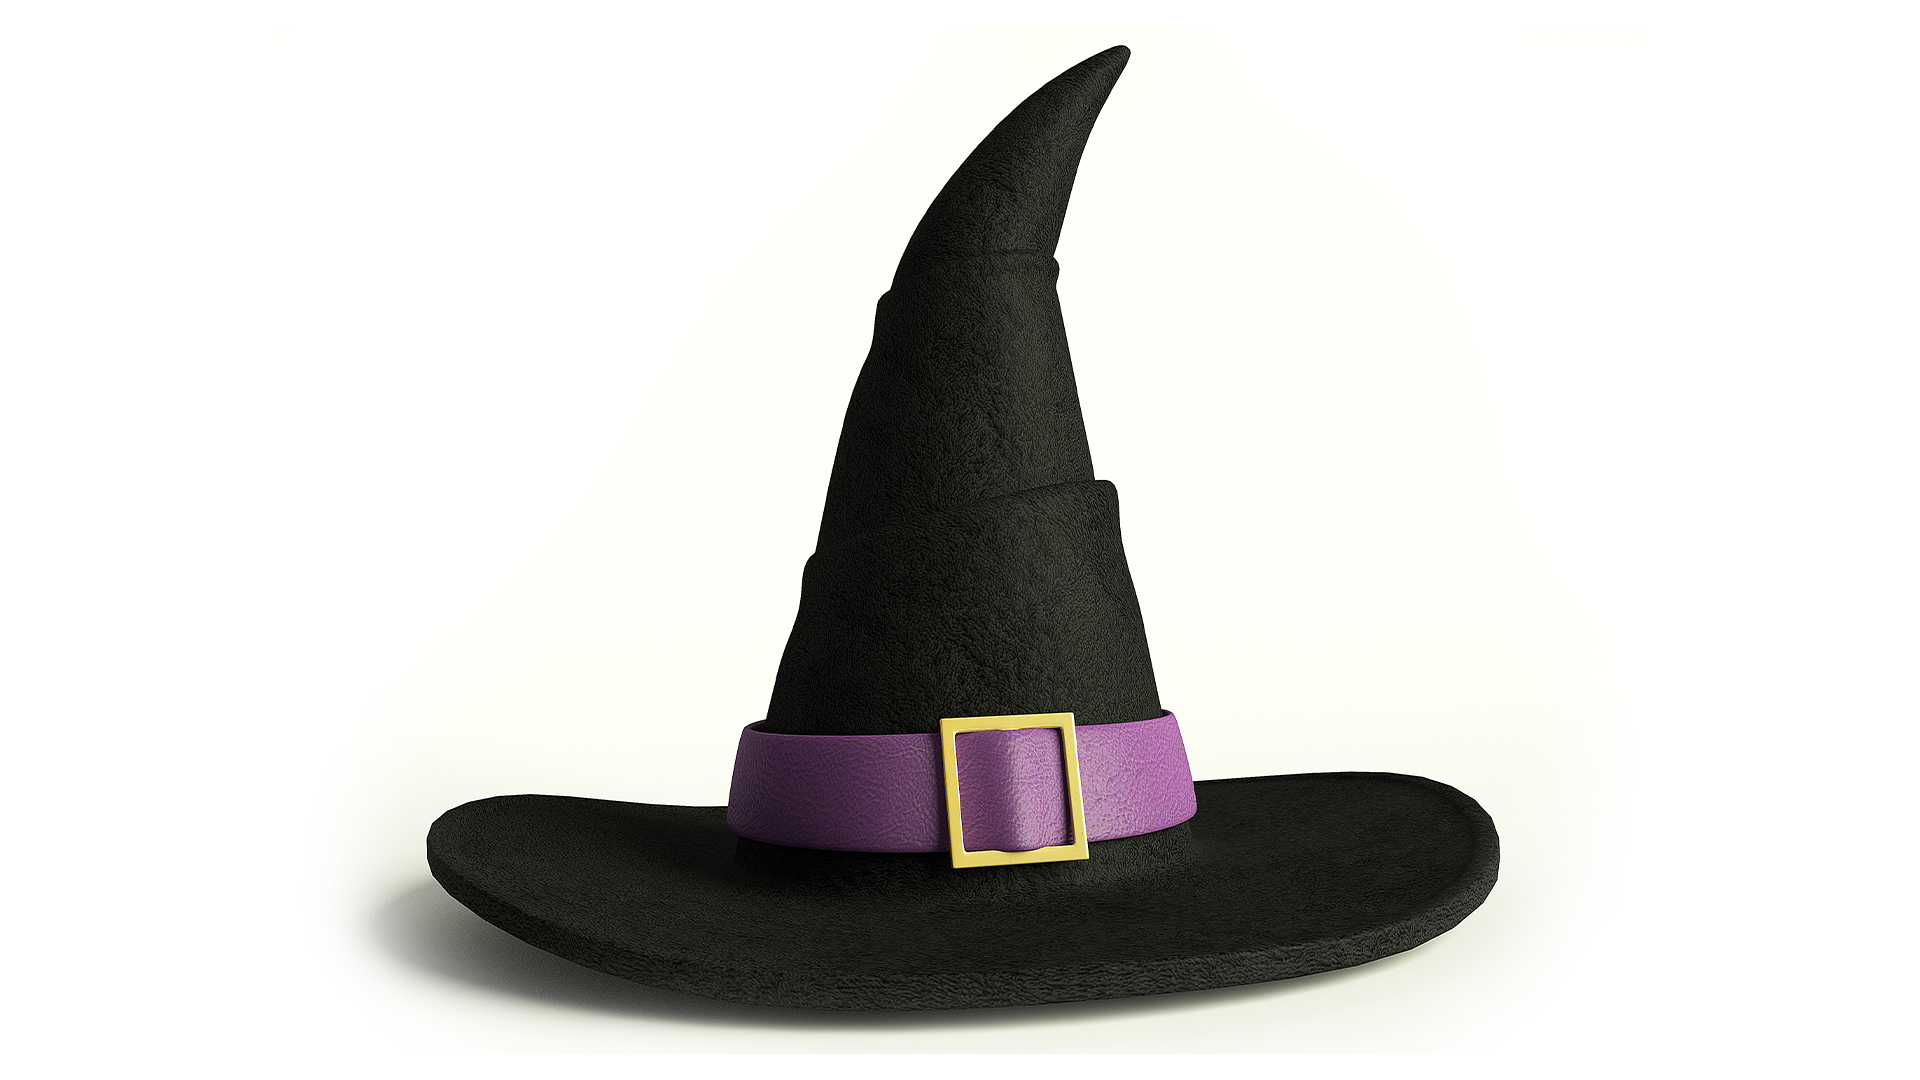 A witch's hat